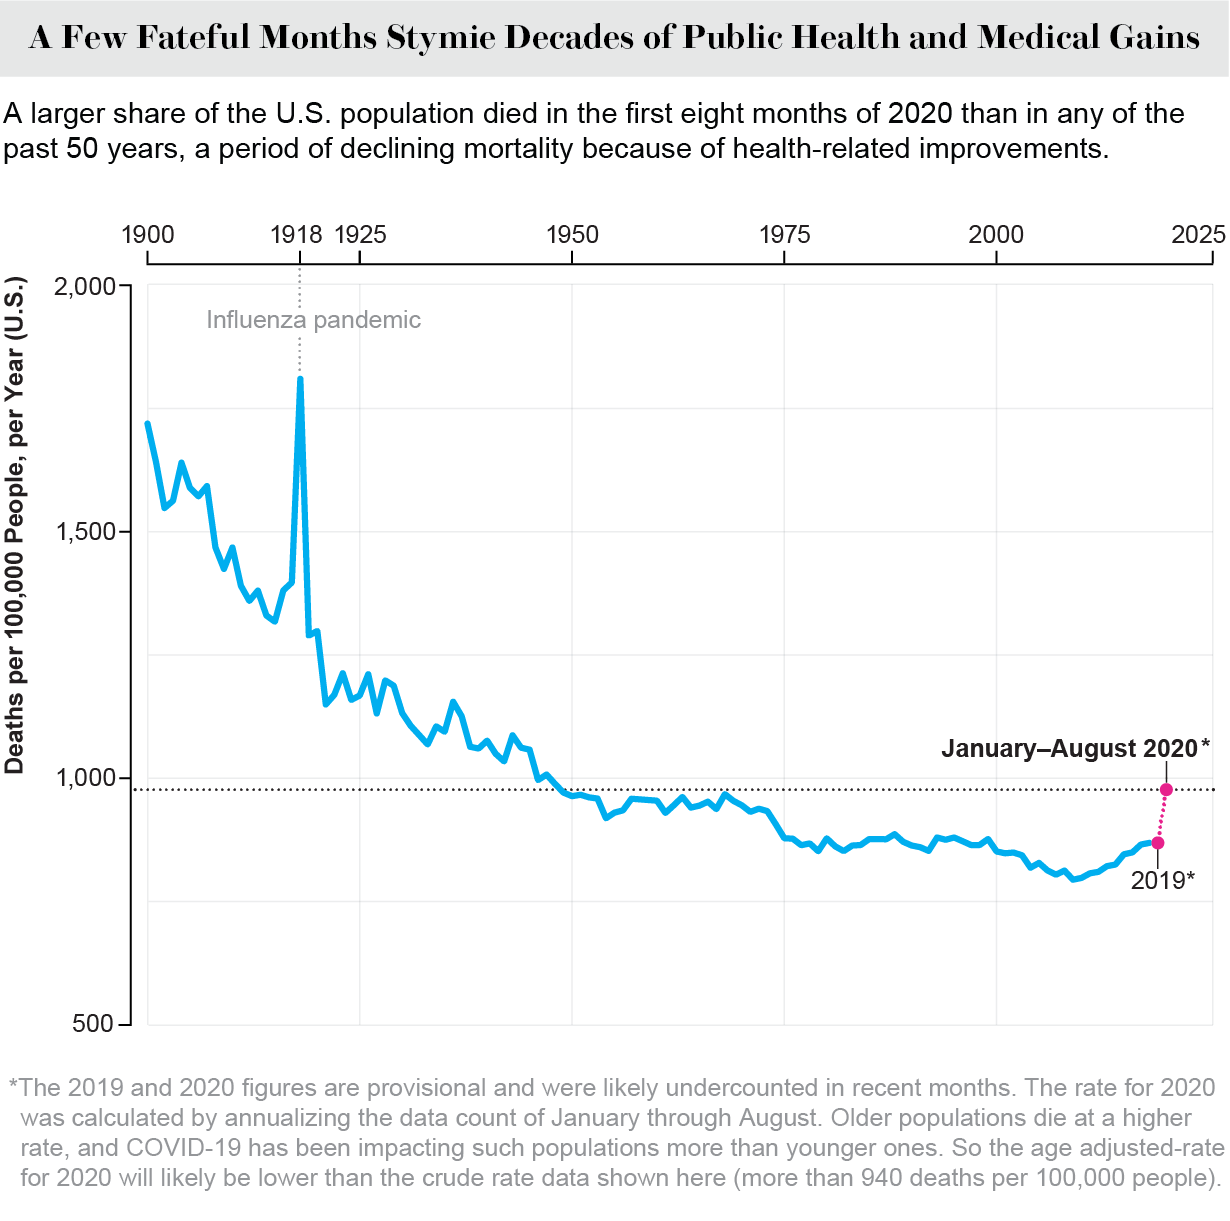 Chart shows crude death rates (1900-2020). A larger share of the U.S. population died in the first 8 months of 2020 than any of the past 50 years.